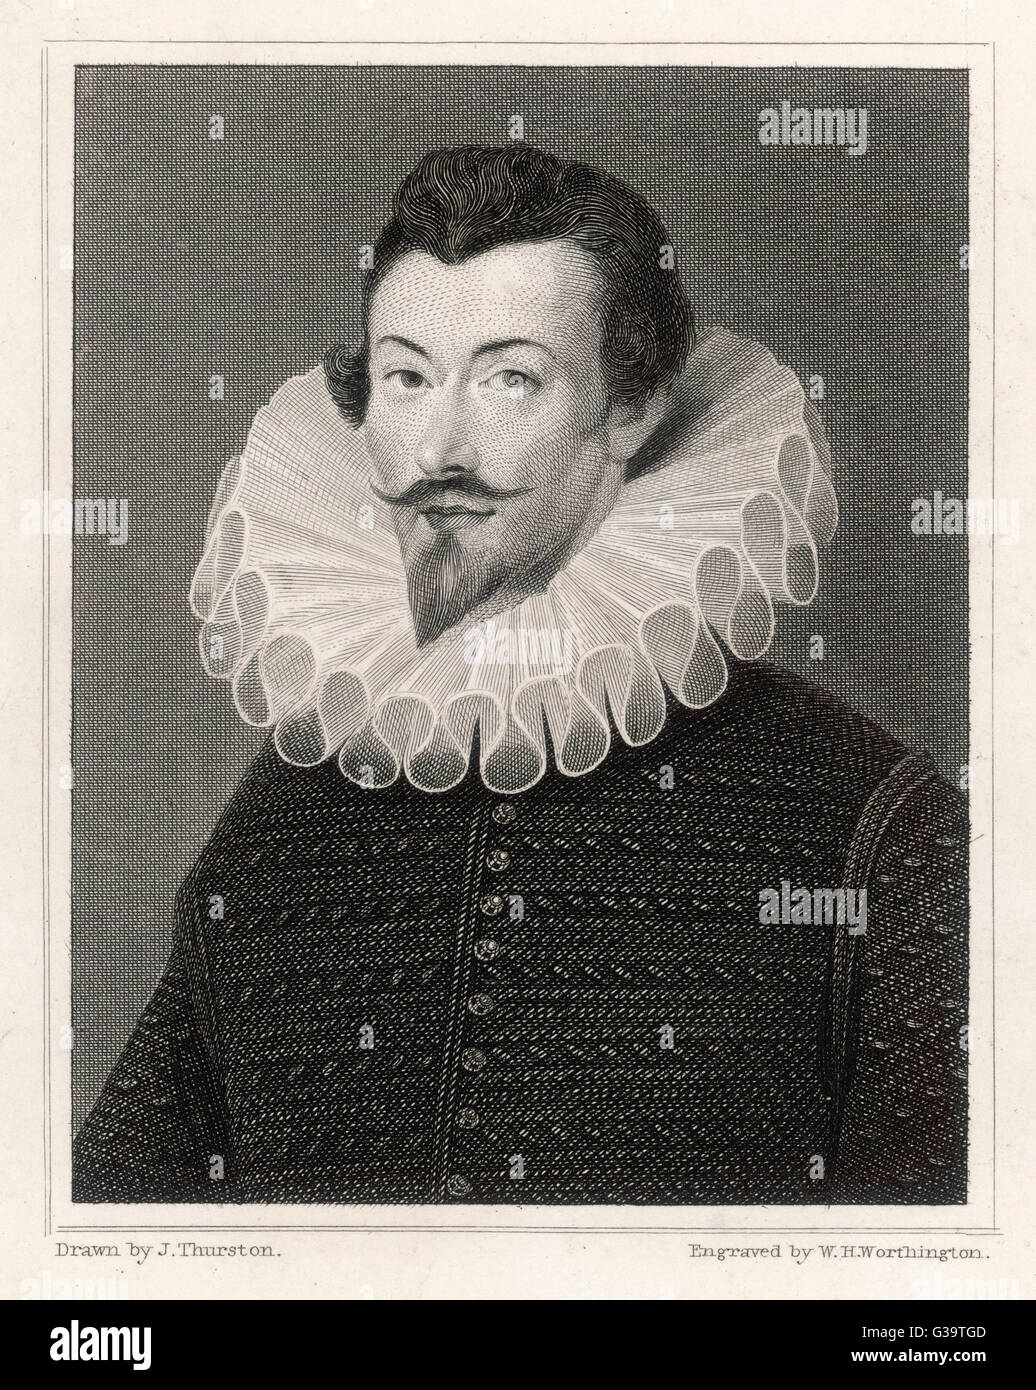 SIR JOHN HARINGTON English courtier and writer; inventor of the flush toilet  Date: 1561 - 1612 Stock Photo - Alamy